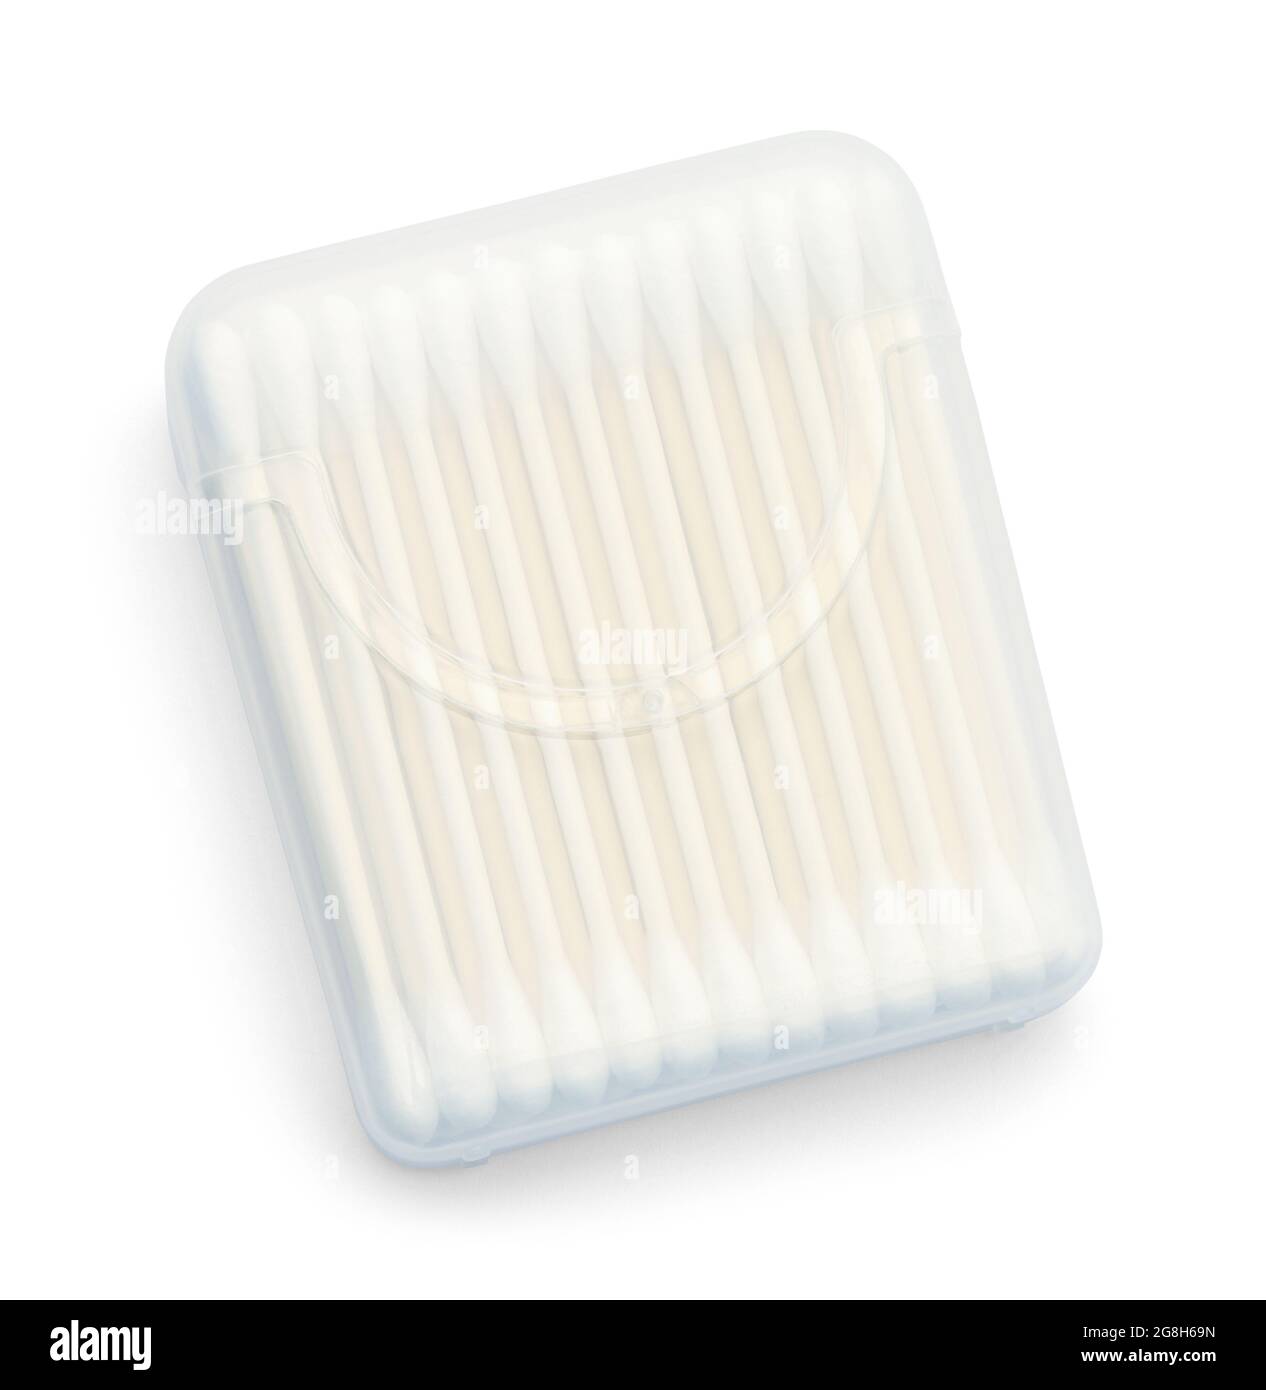 Closed Box of Cotton Swabs Cut Out on White. Stock Photo